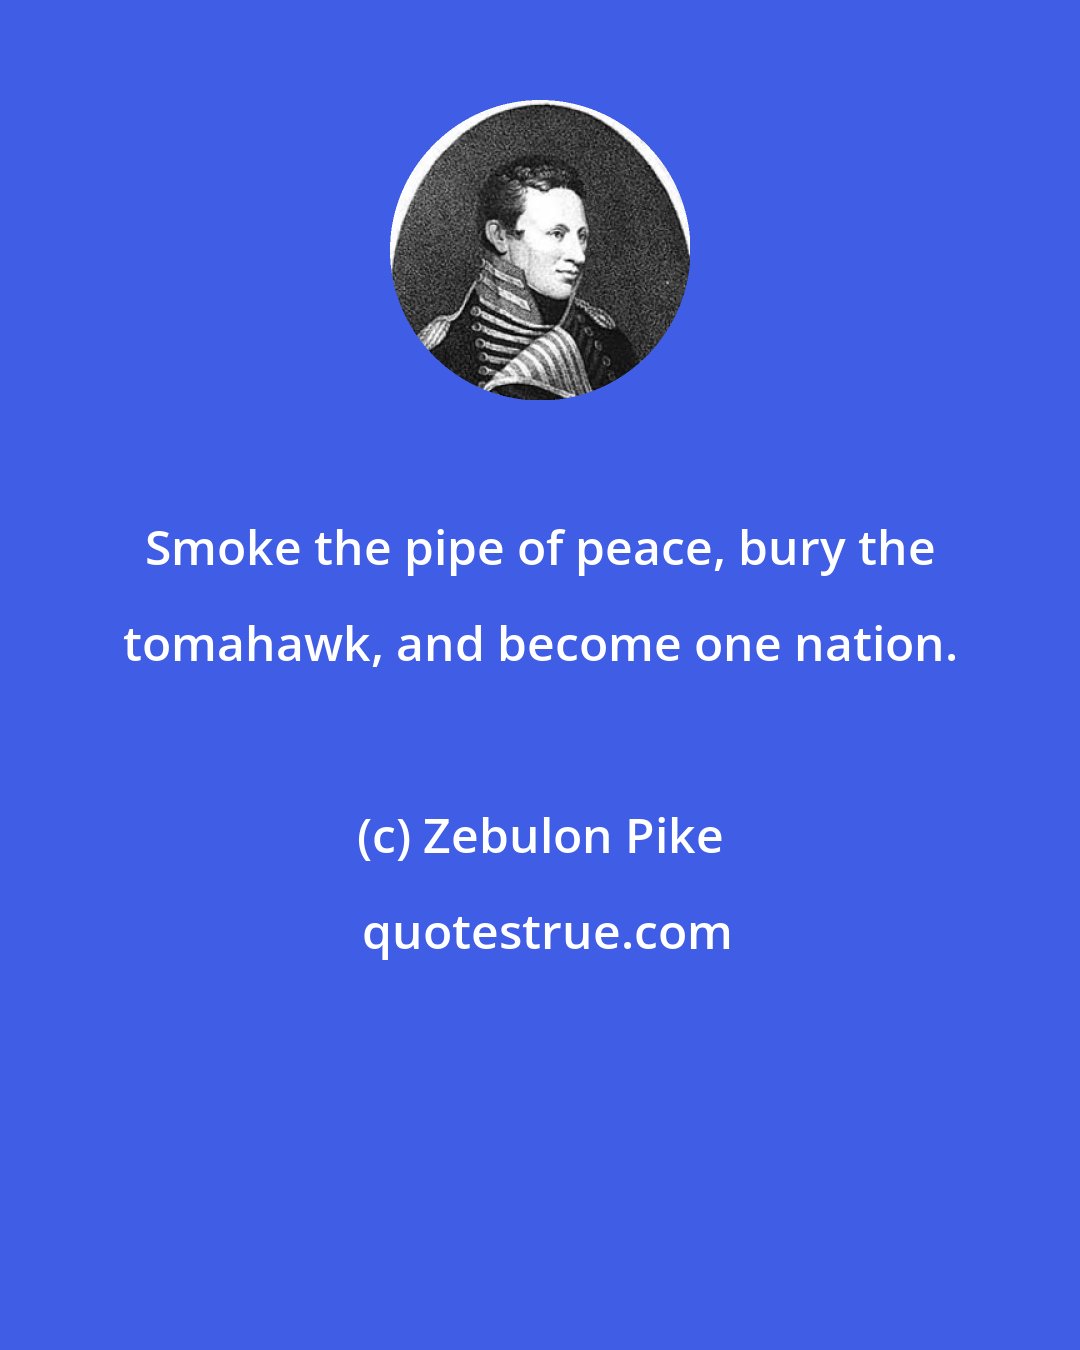 Zebulon Pike: Smoke the pipe of peace, bury the tomahawk, and become one nation.